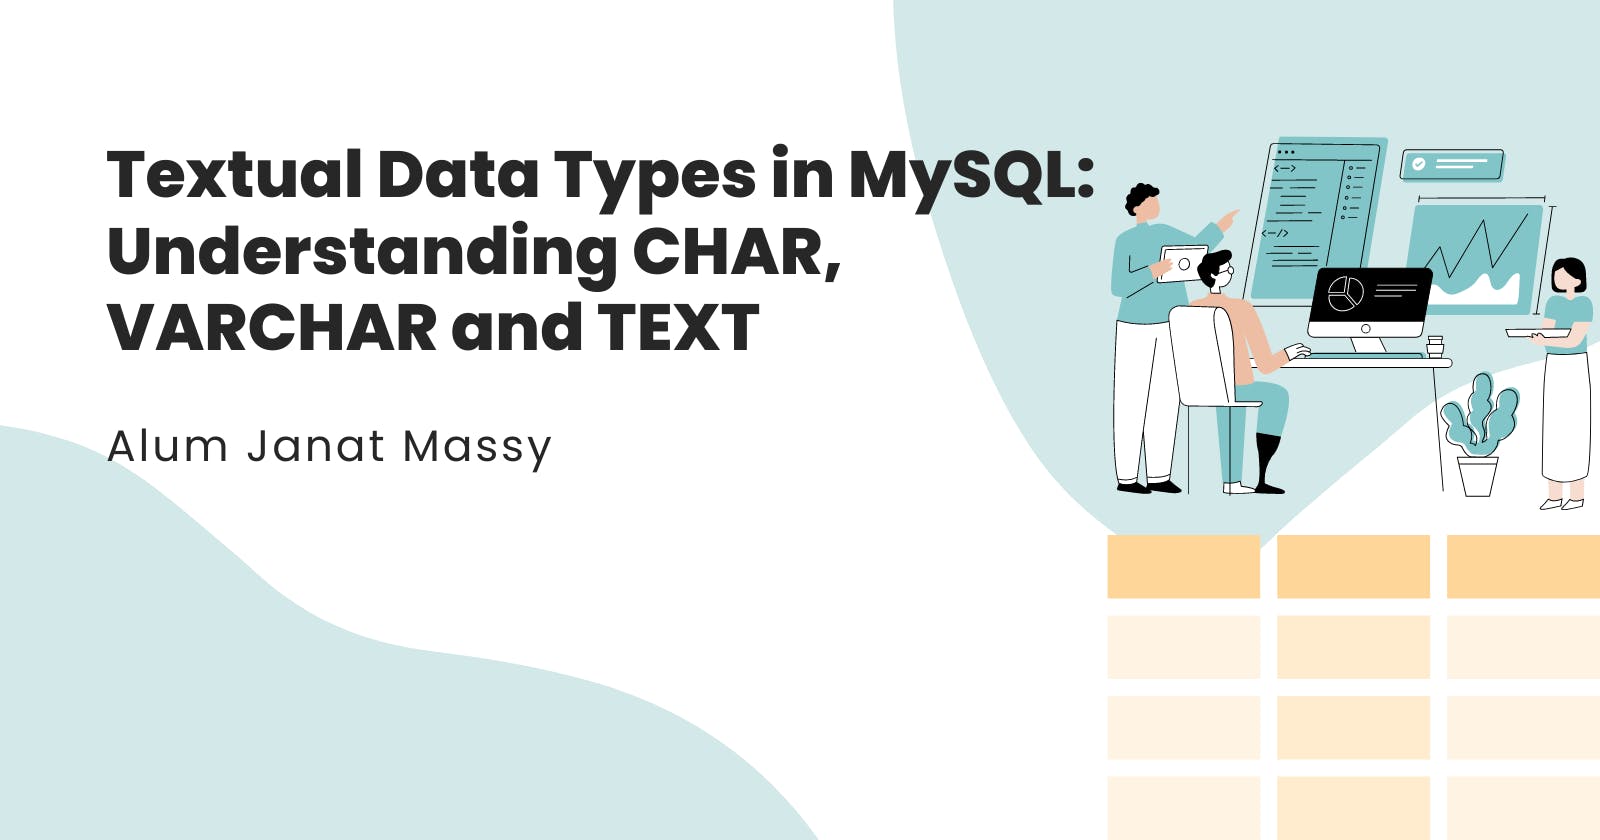 Textual Data Types in MySQL: Understanding CHAR, VARCHAR and TEXT